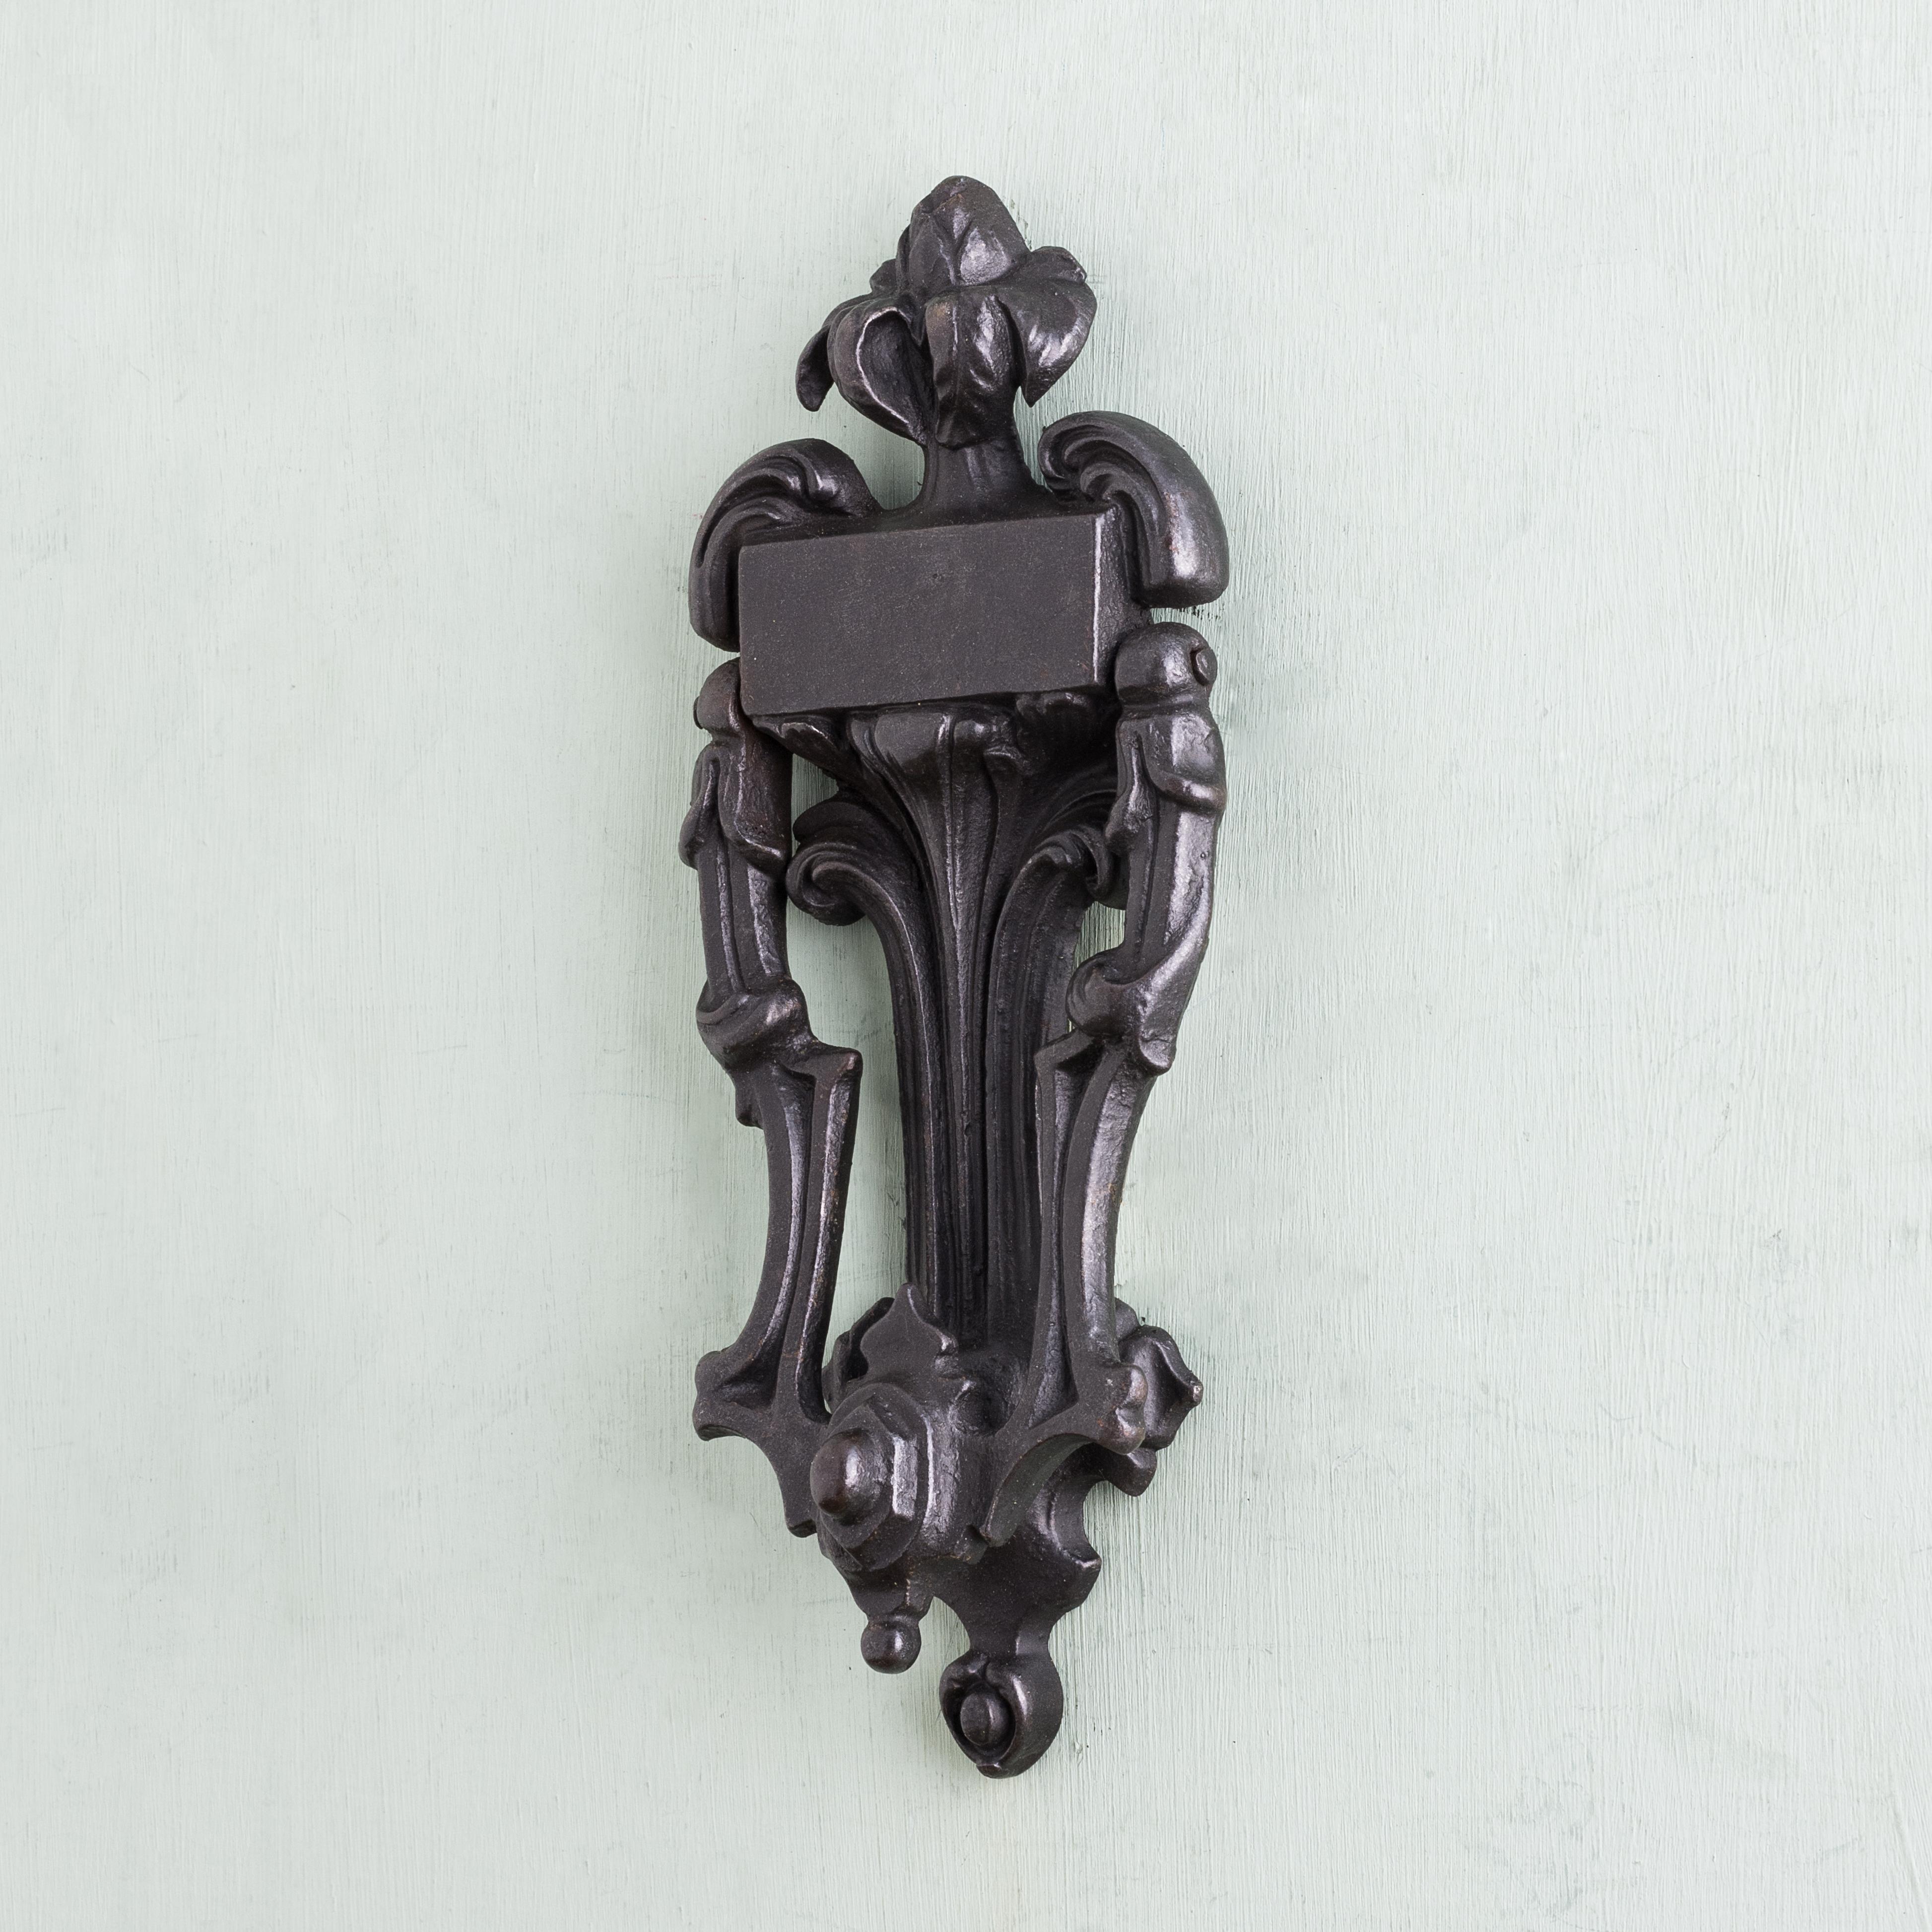 A Victorian cast iron door knocker, made by (and stamped) Archibald Kenrick & Sons, circa 1880, sold with screws and in good working order.